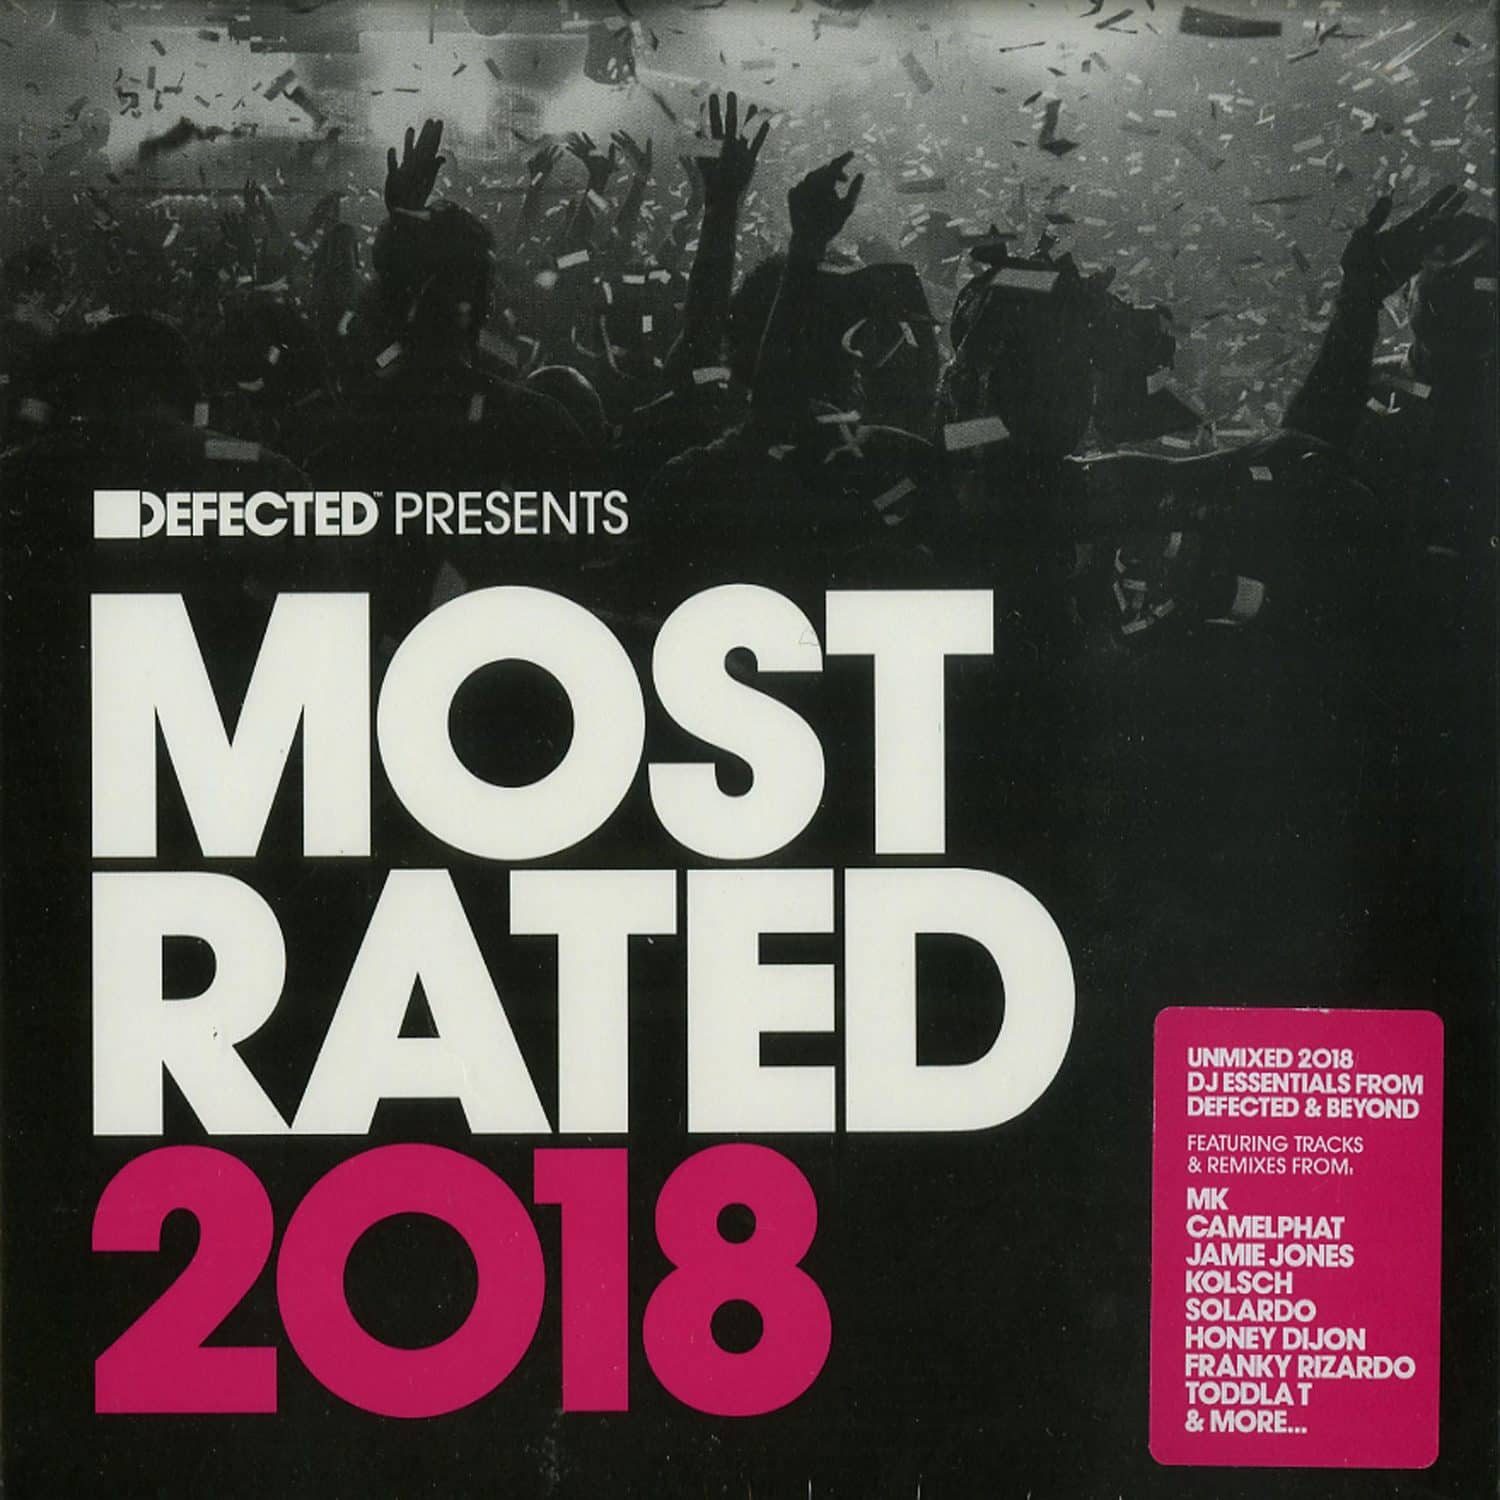 Various Artists - DEFECTED PRESENTS MOST RATED 2018 